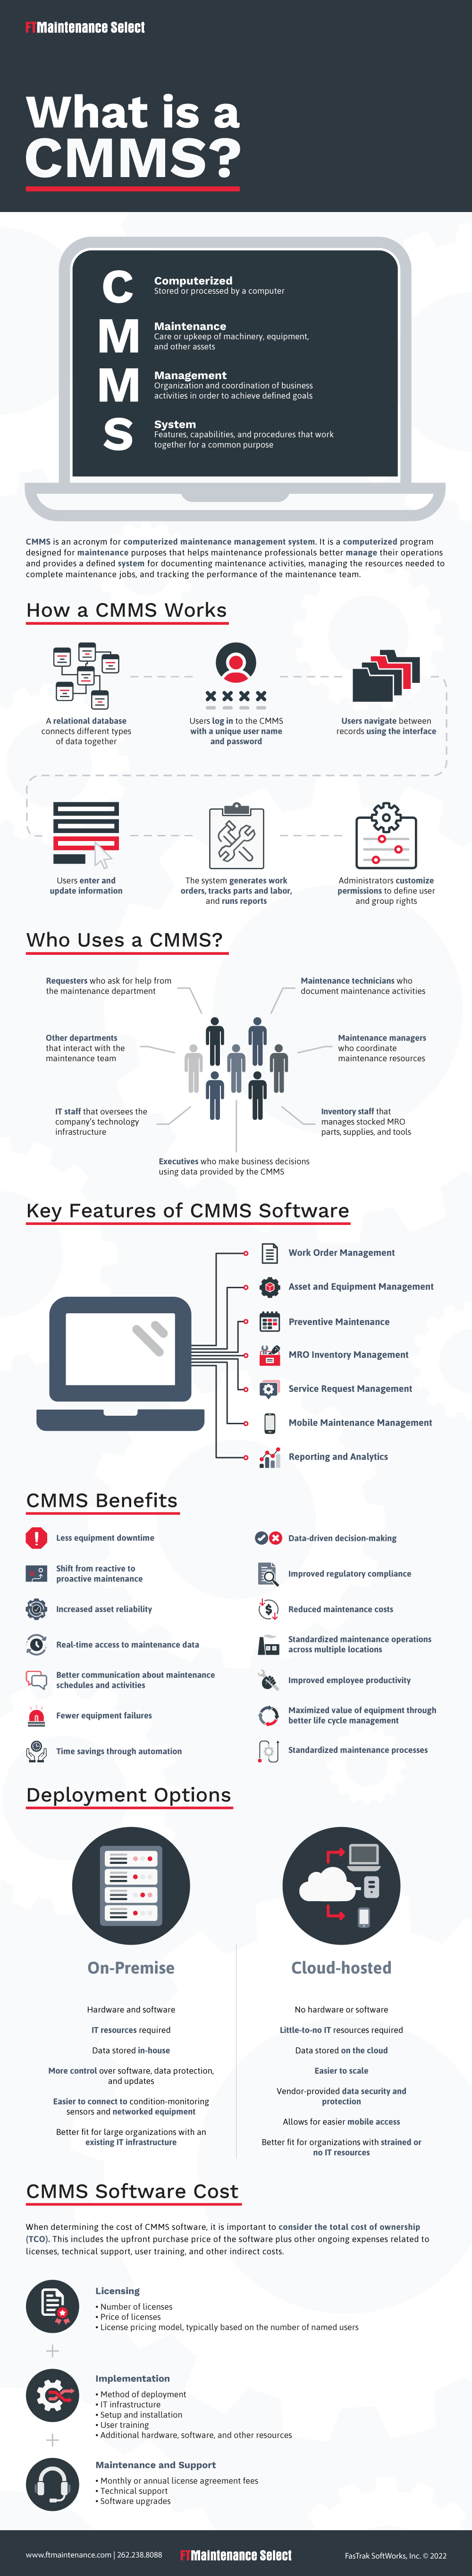 Infographic answering the question of what is a CMMS?